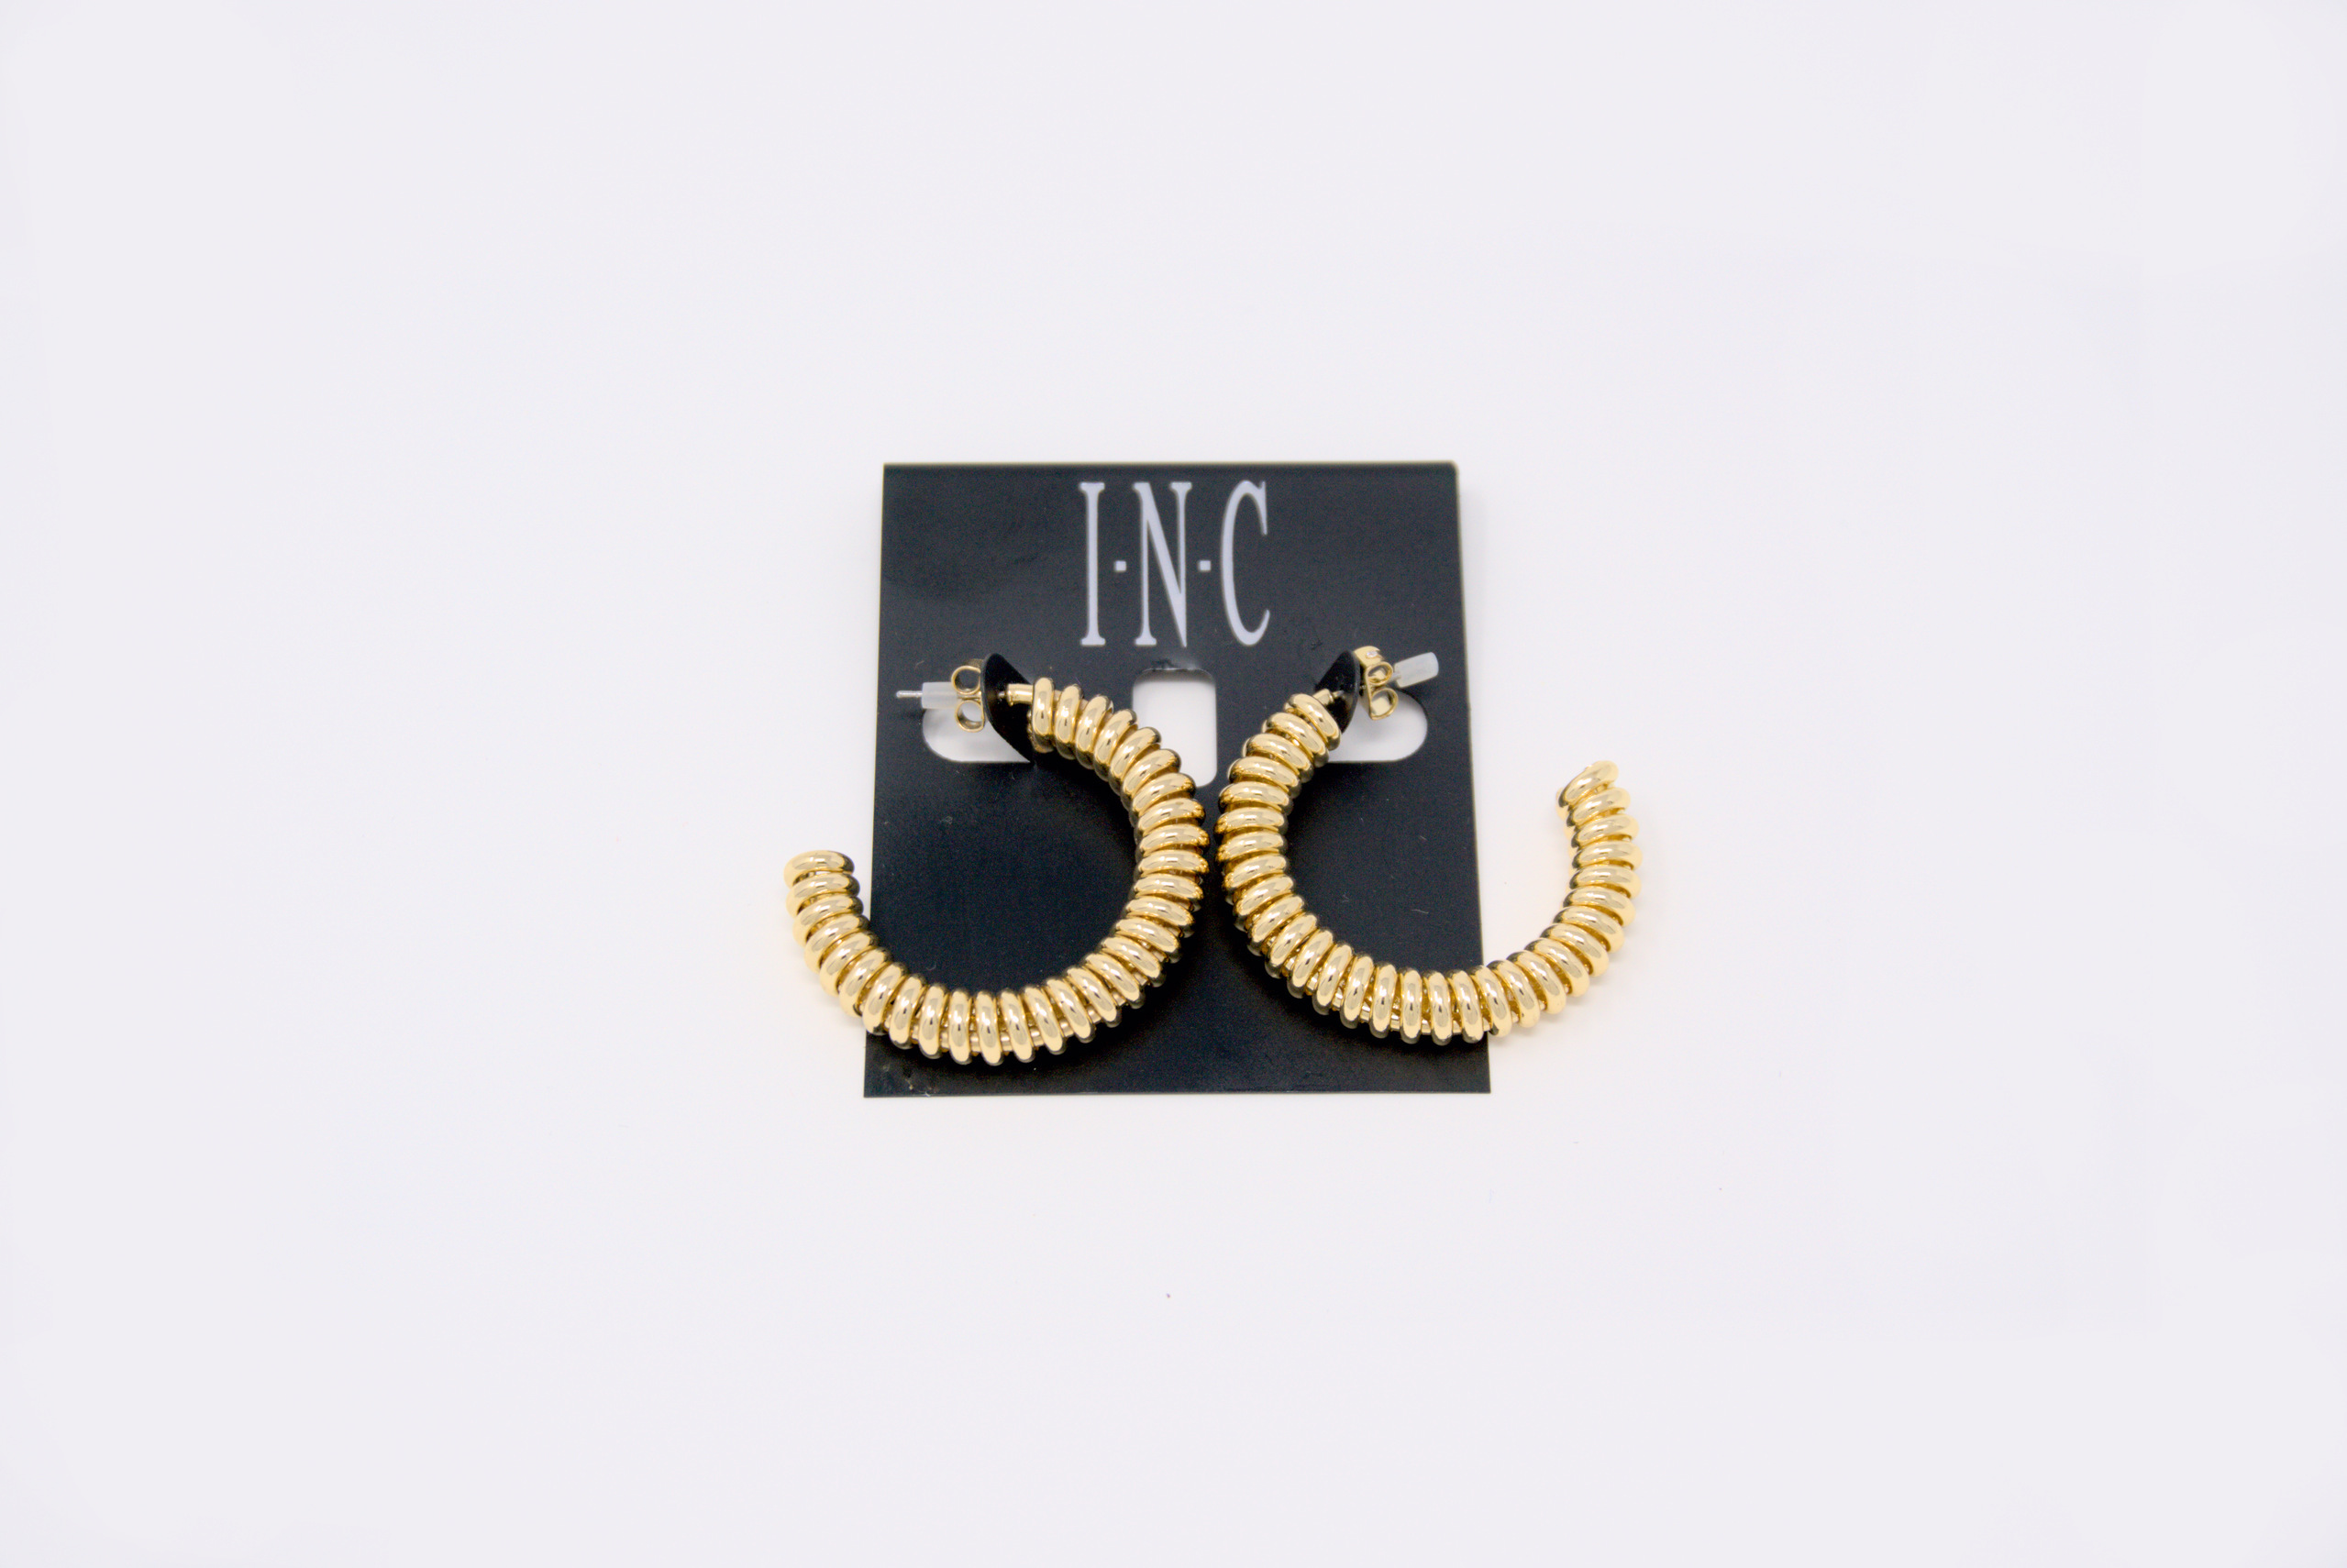 Charm & Lovely introduces INC Gold-Tone Medium Spiral C-Hoop Earrings, 1.55, Post back closure